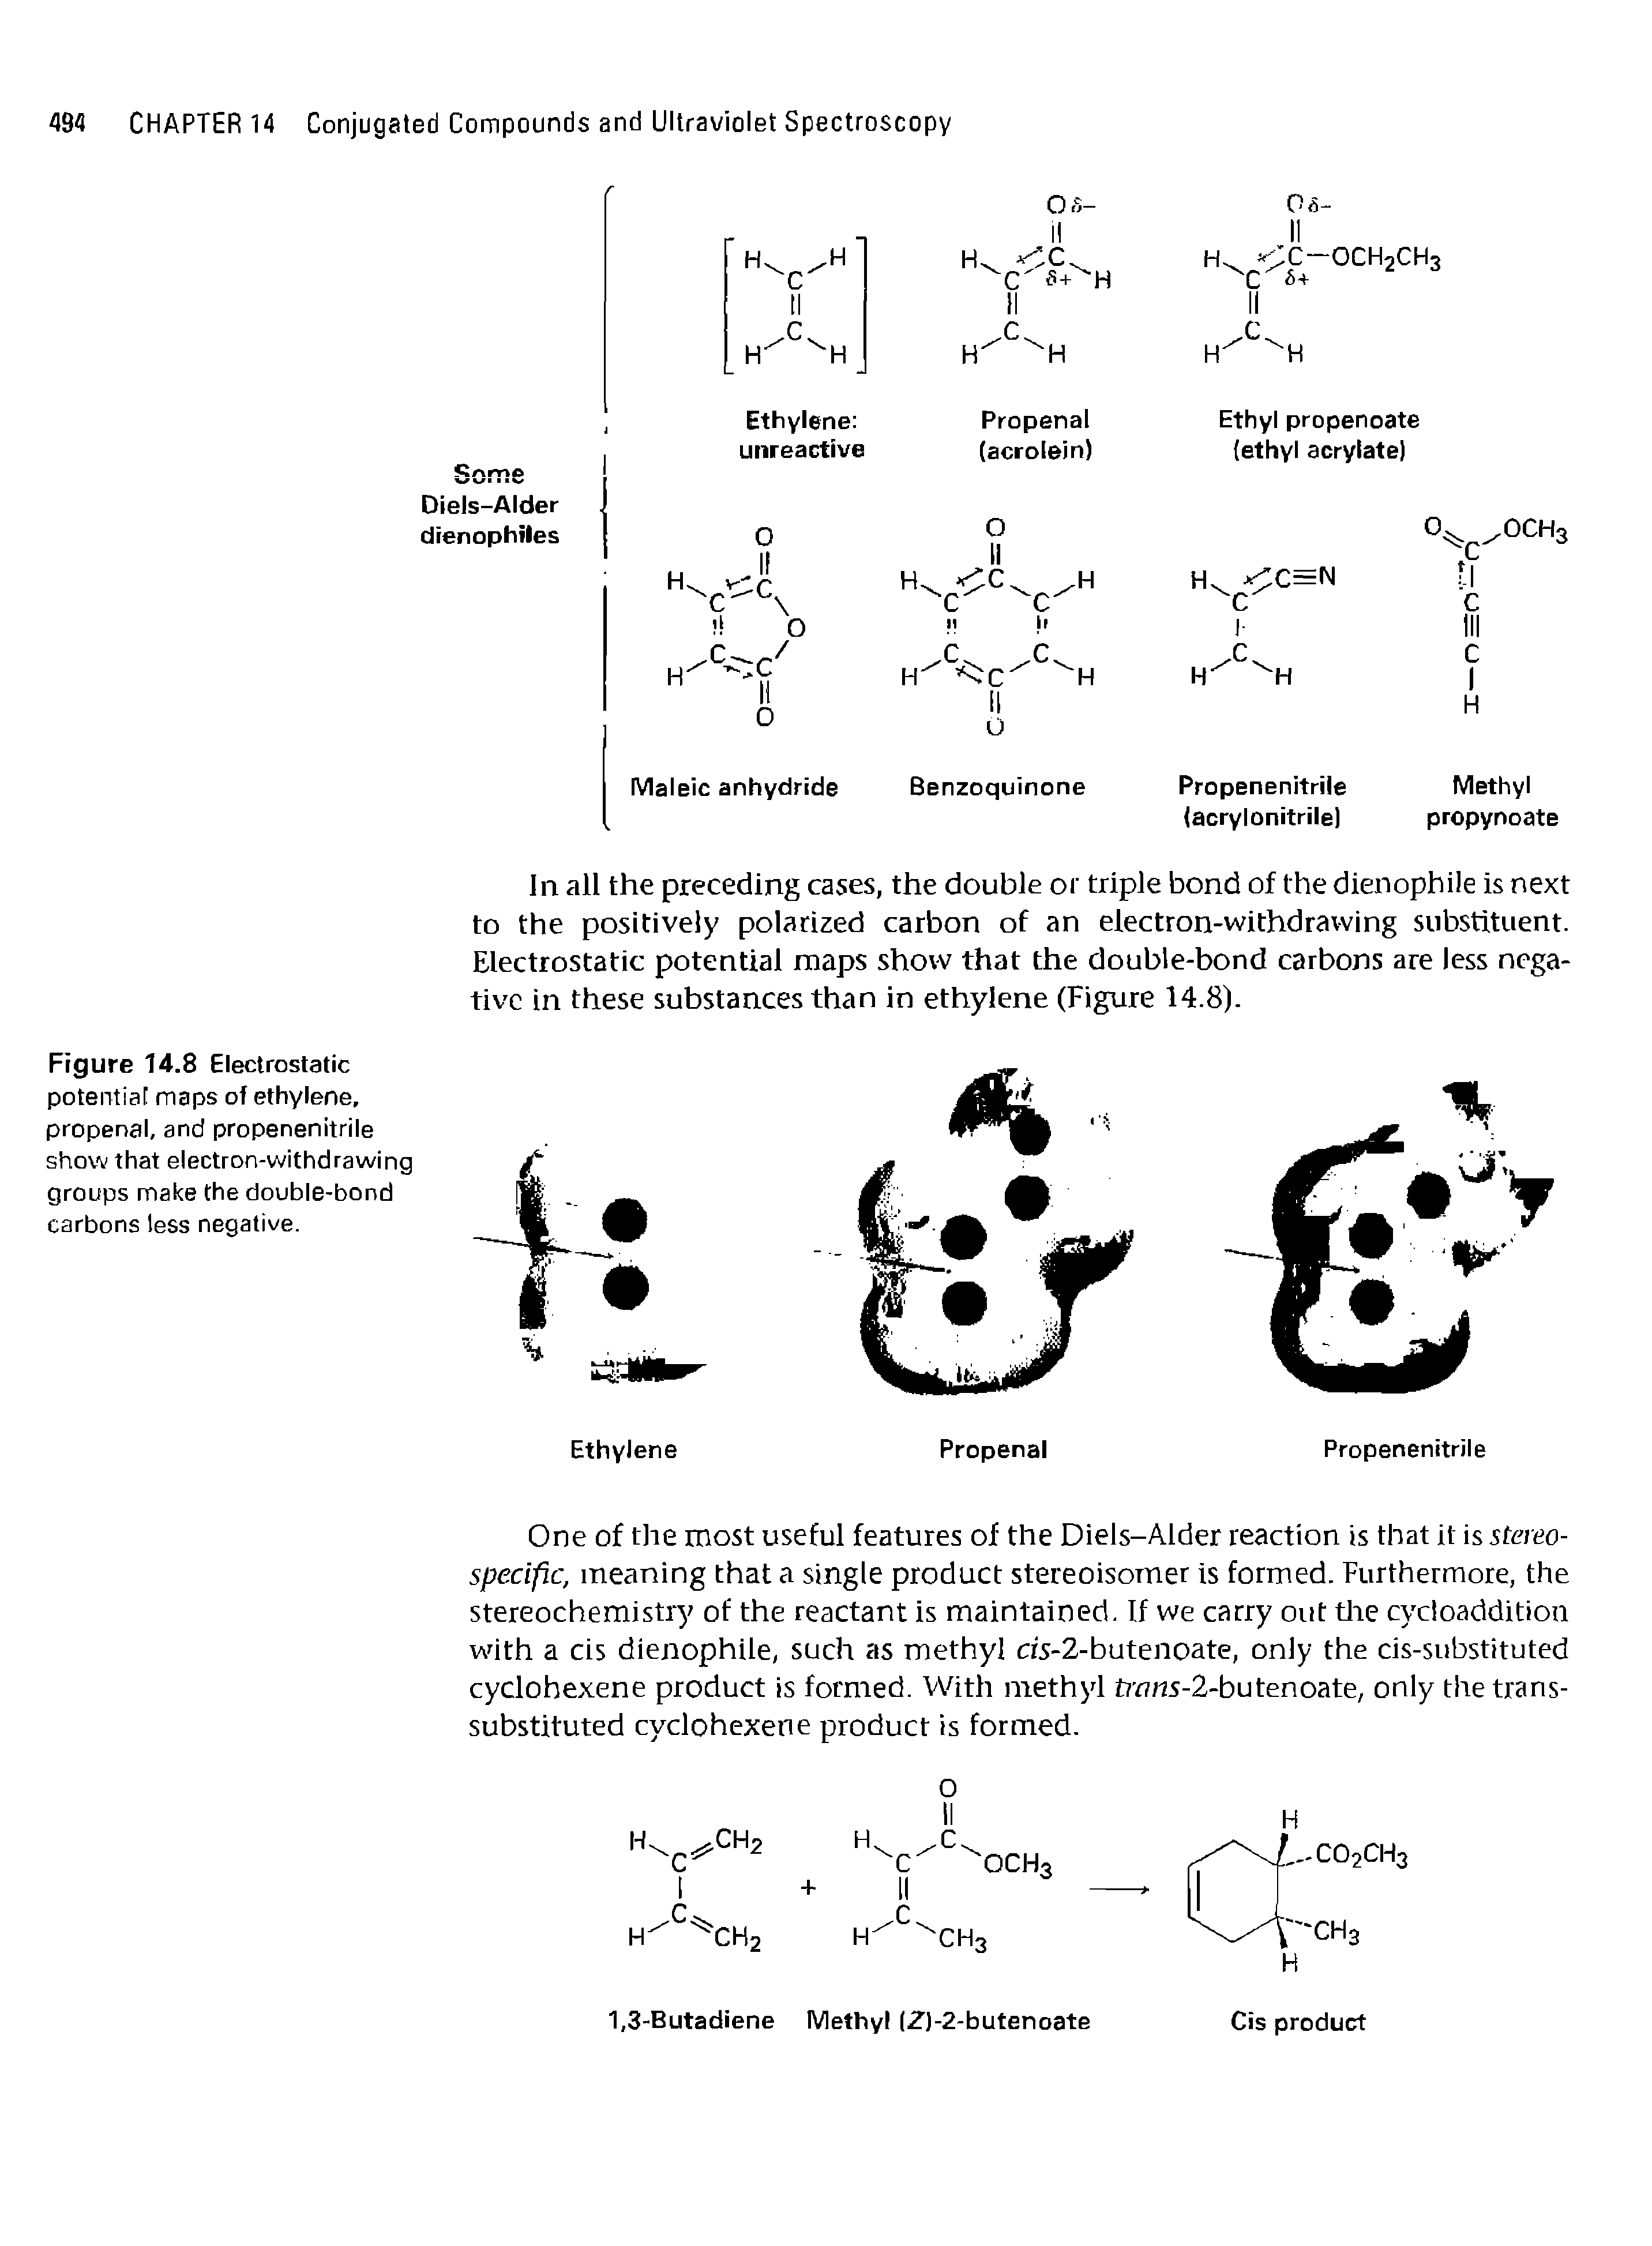 Figure 14.8 Electrostatic potential maps of ethylene, propenal, and propenenitrile show that electron-withdrawing groups make the double-bond carbons less negative.